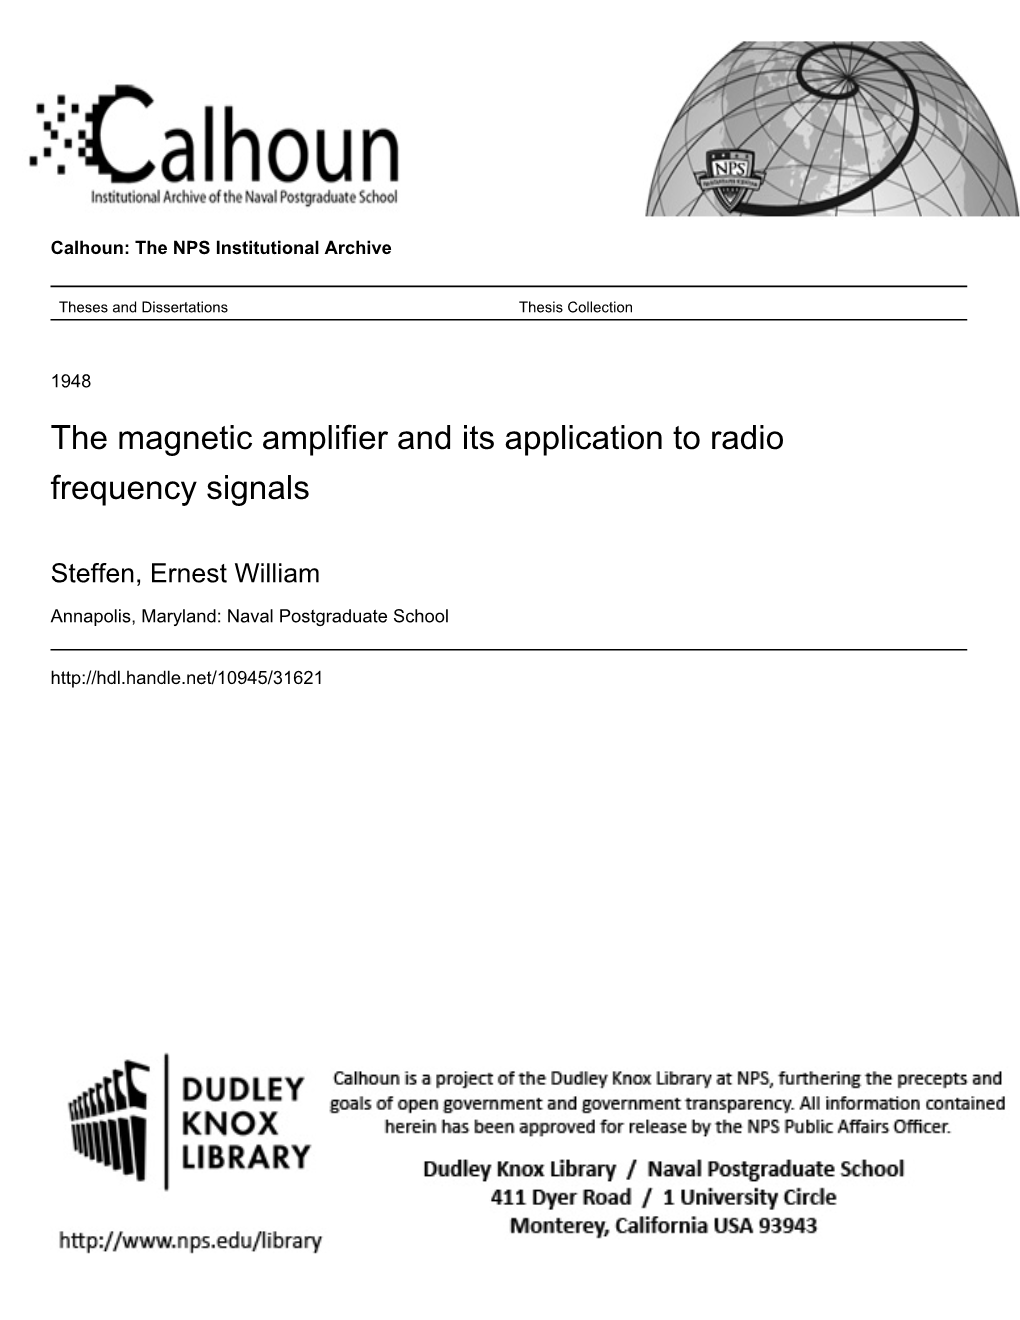 The Magnetic Amplifier and Its Application to Radio Frequency Signals